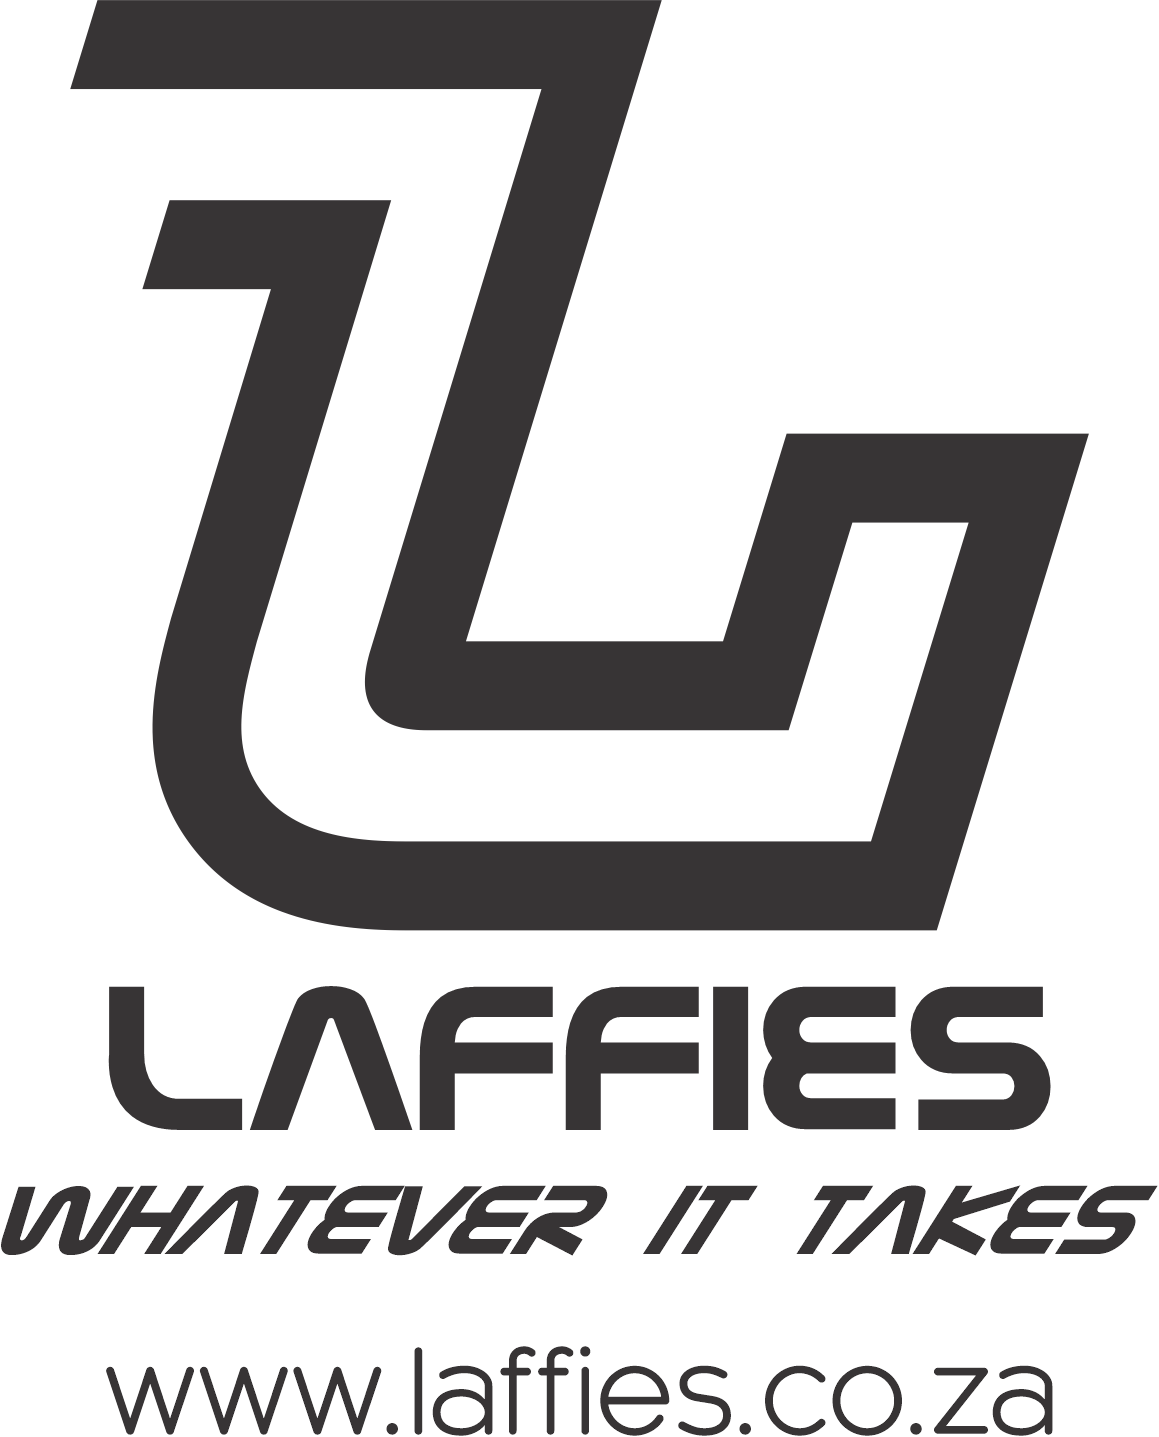 laffies gear - whatever it takes